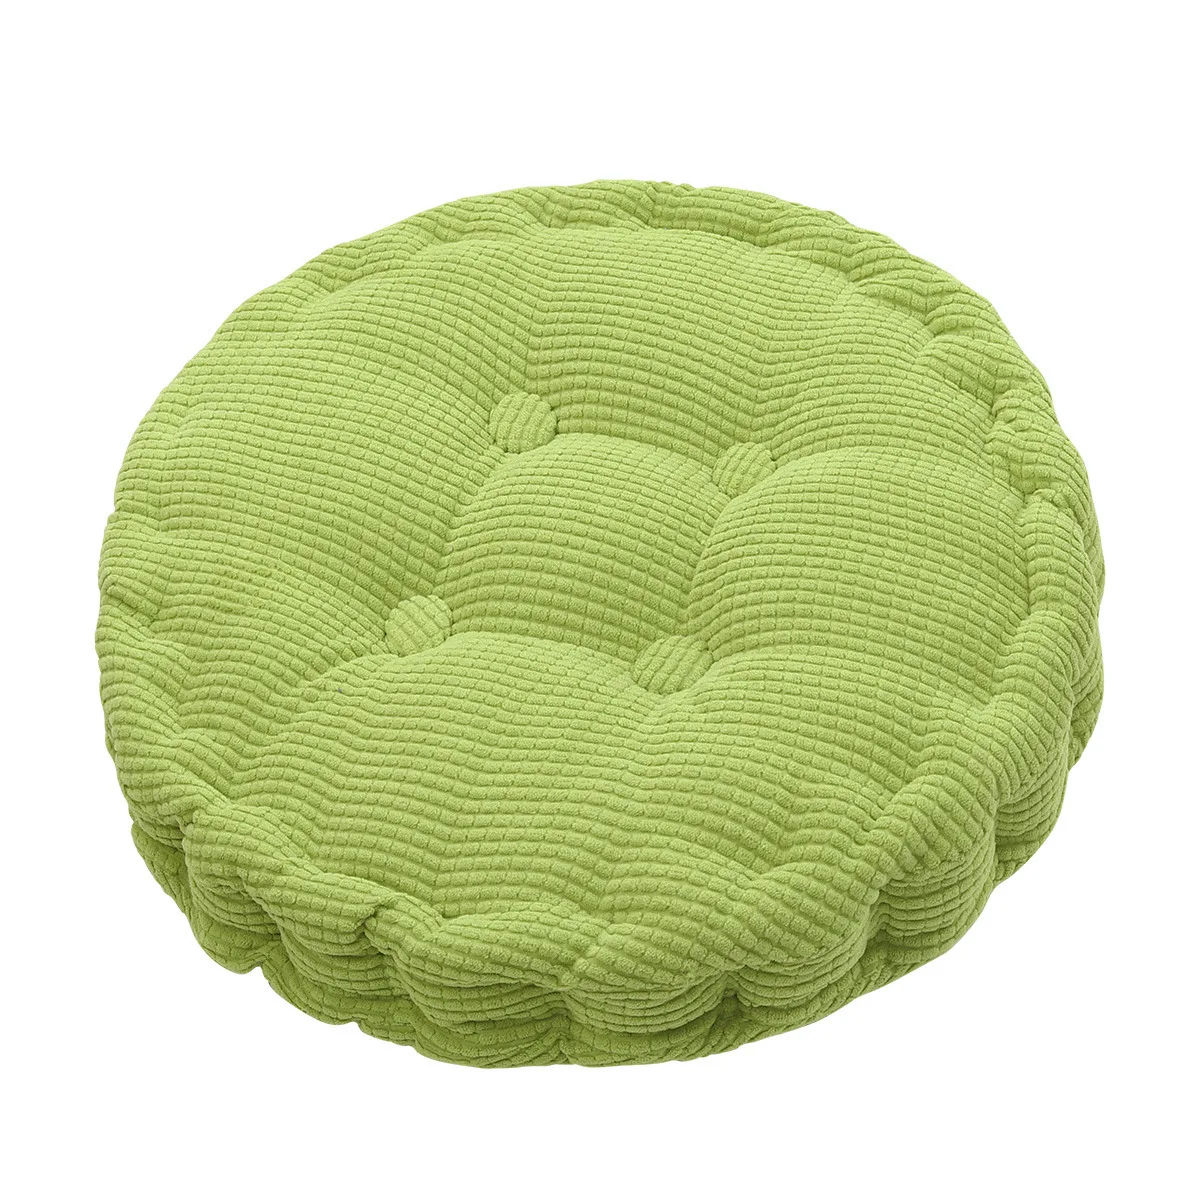 Thicken Square Corncob Tatami Seat Office Chair Seat Cushion Soft Sofa Cushion for Home Floor Decor Textile Knee Pillow